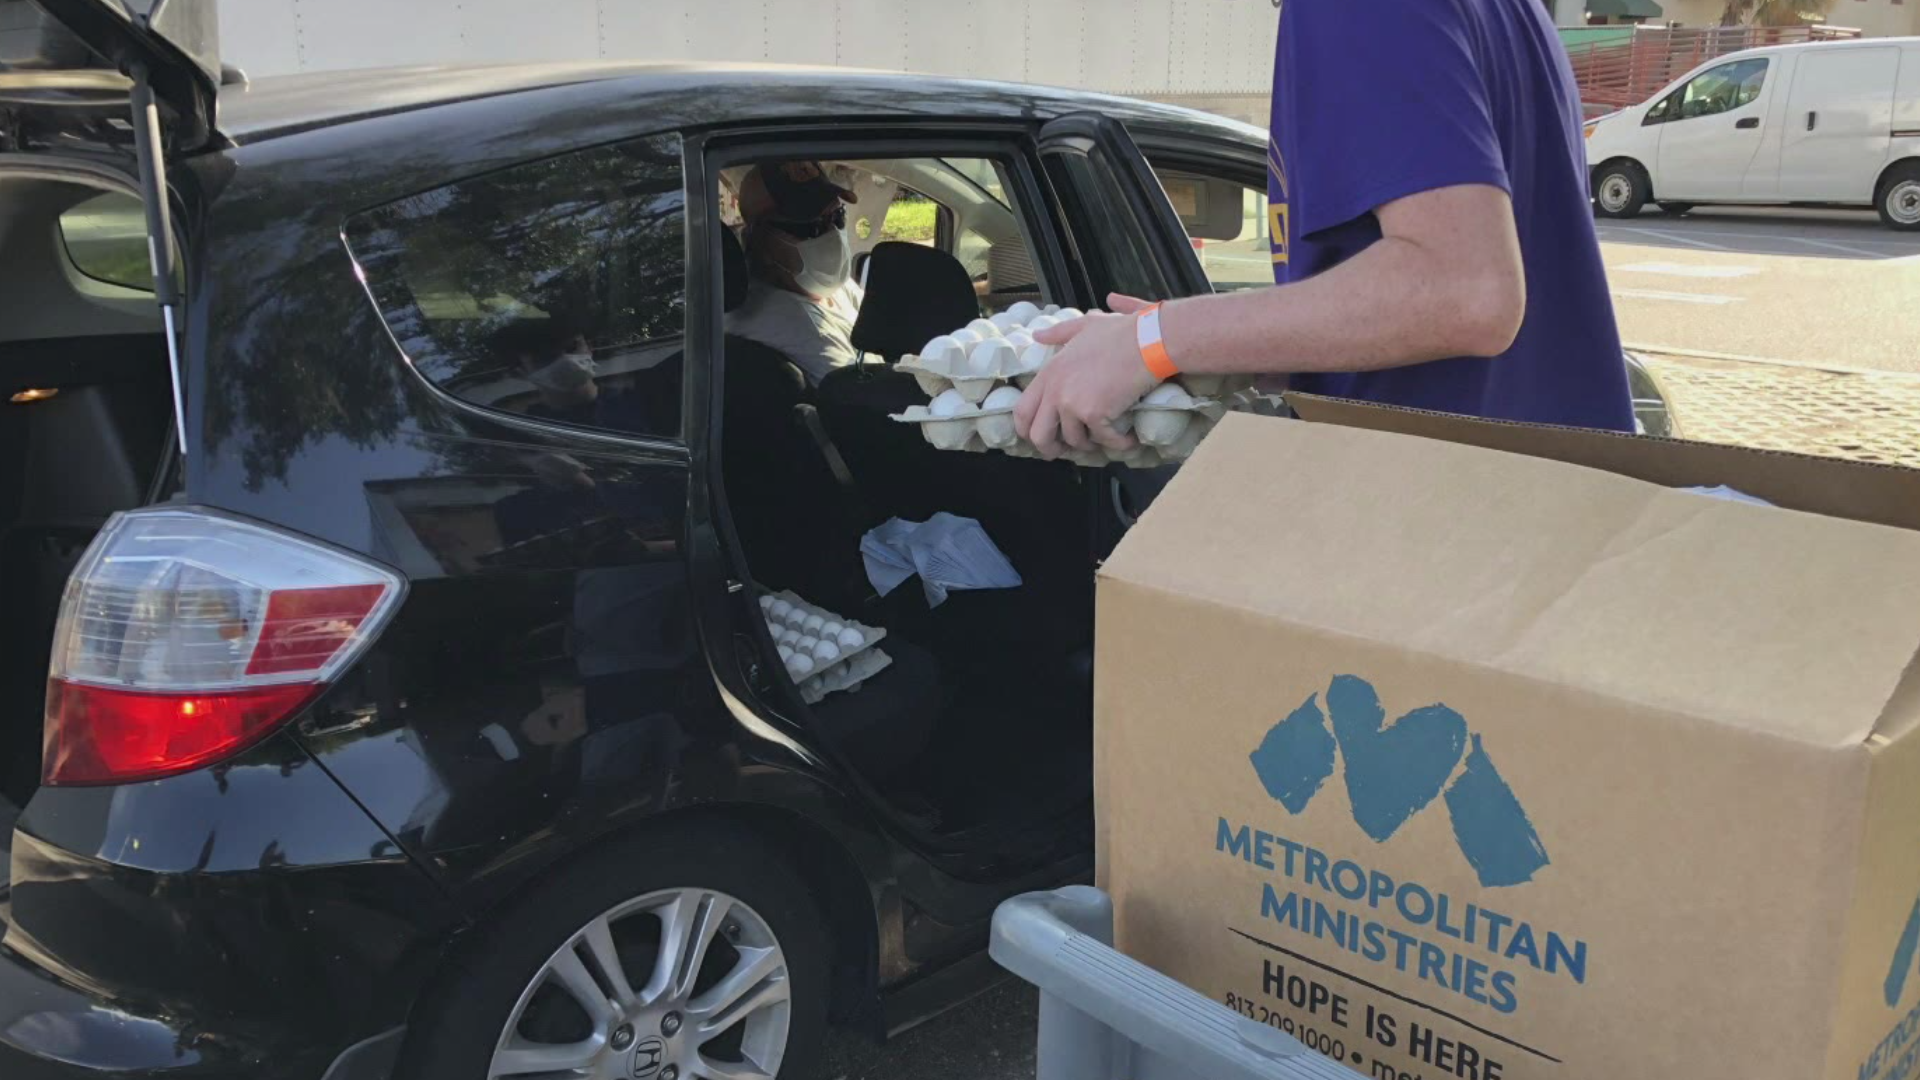 We learn how we all can help Metropolitan Ministries prep for the holidays.